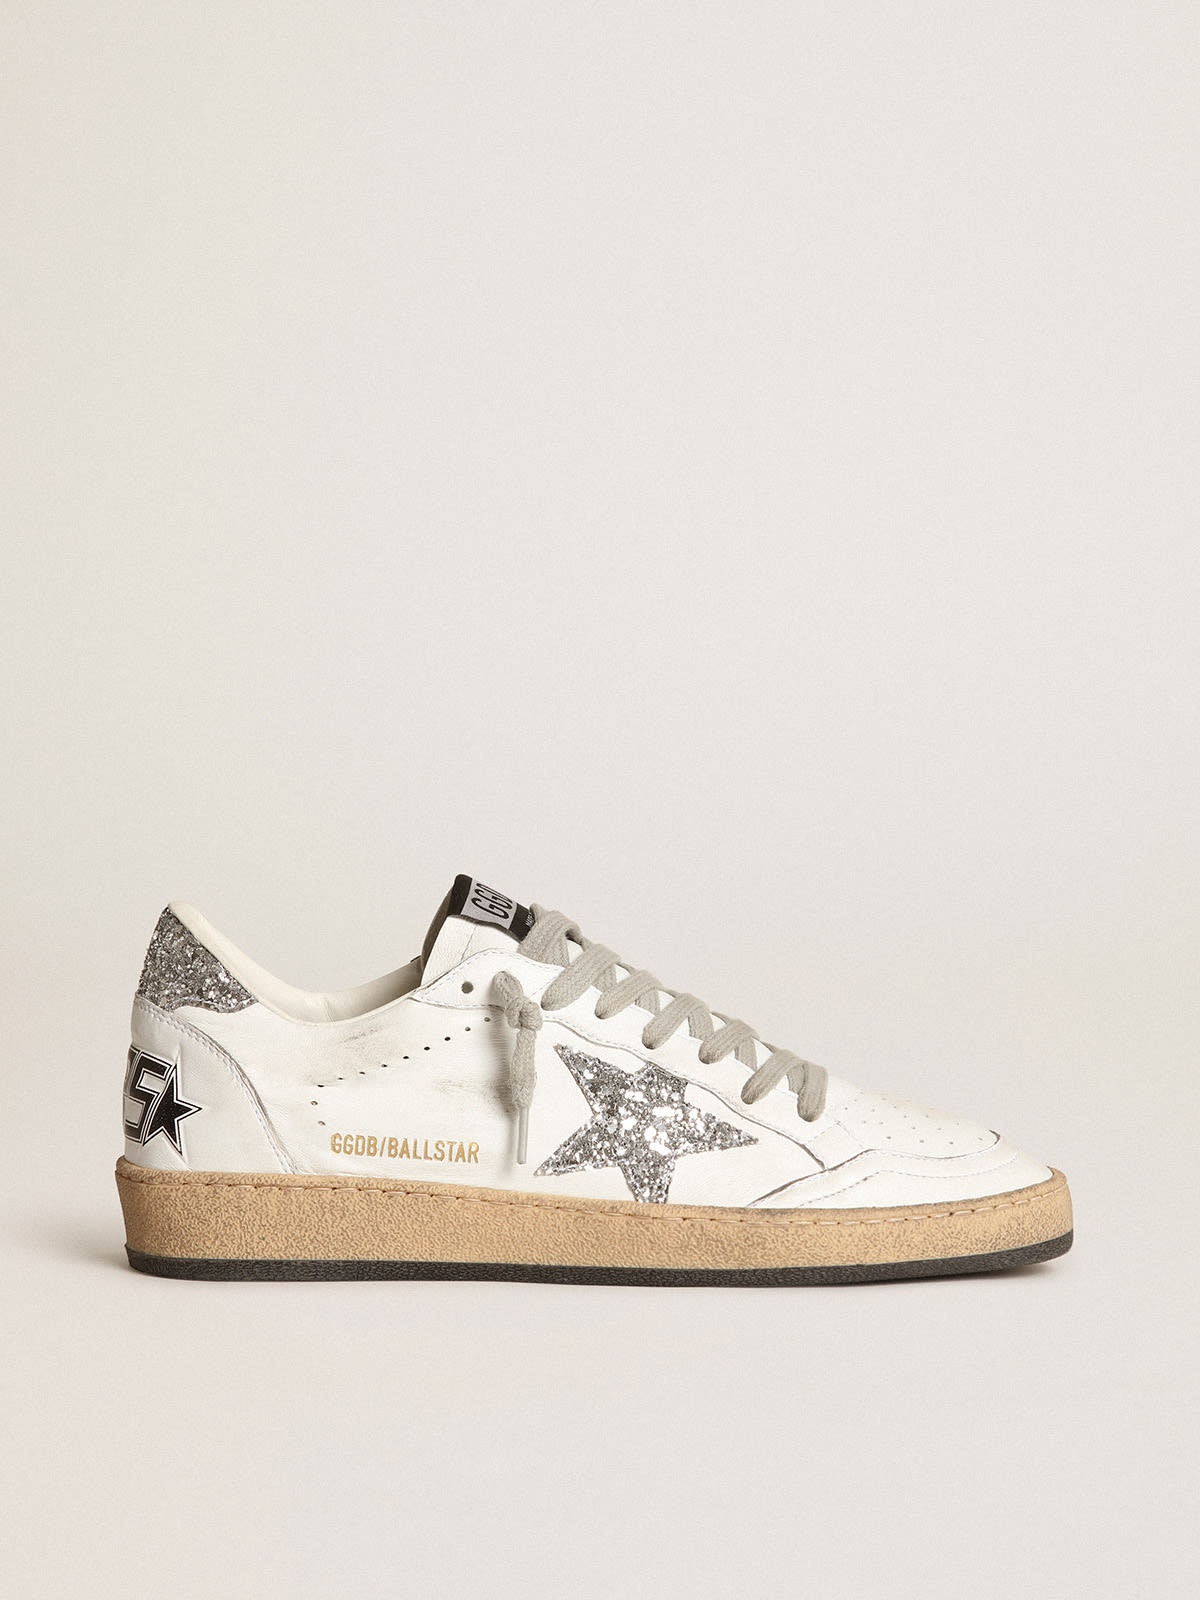 Ball Star sneakers in white nappa leather with silver glitter star and heel tab - 1